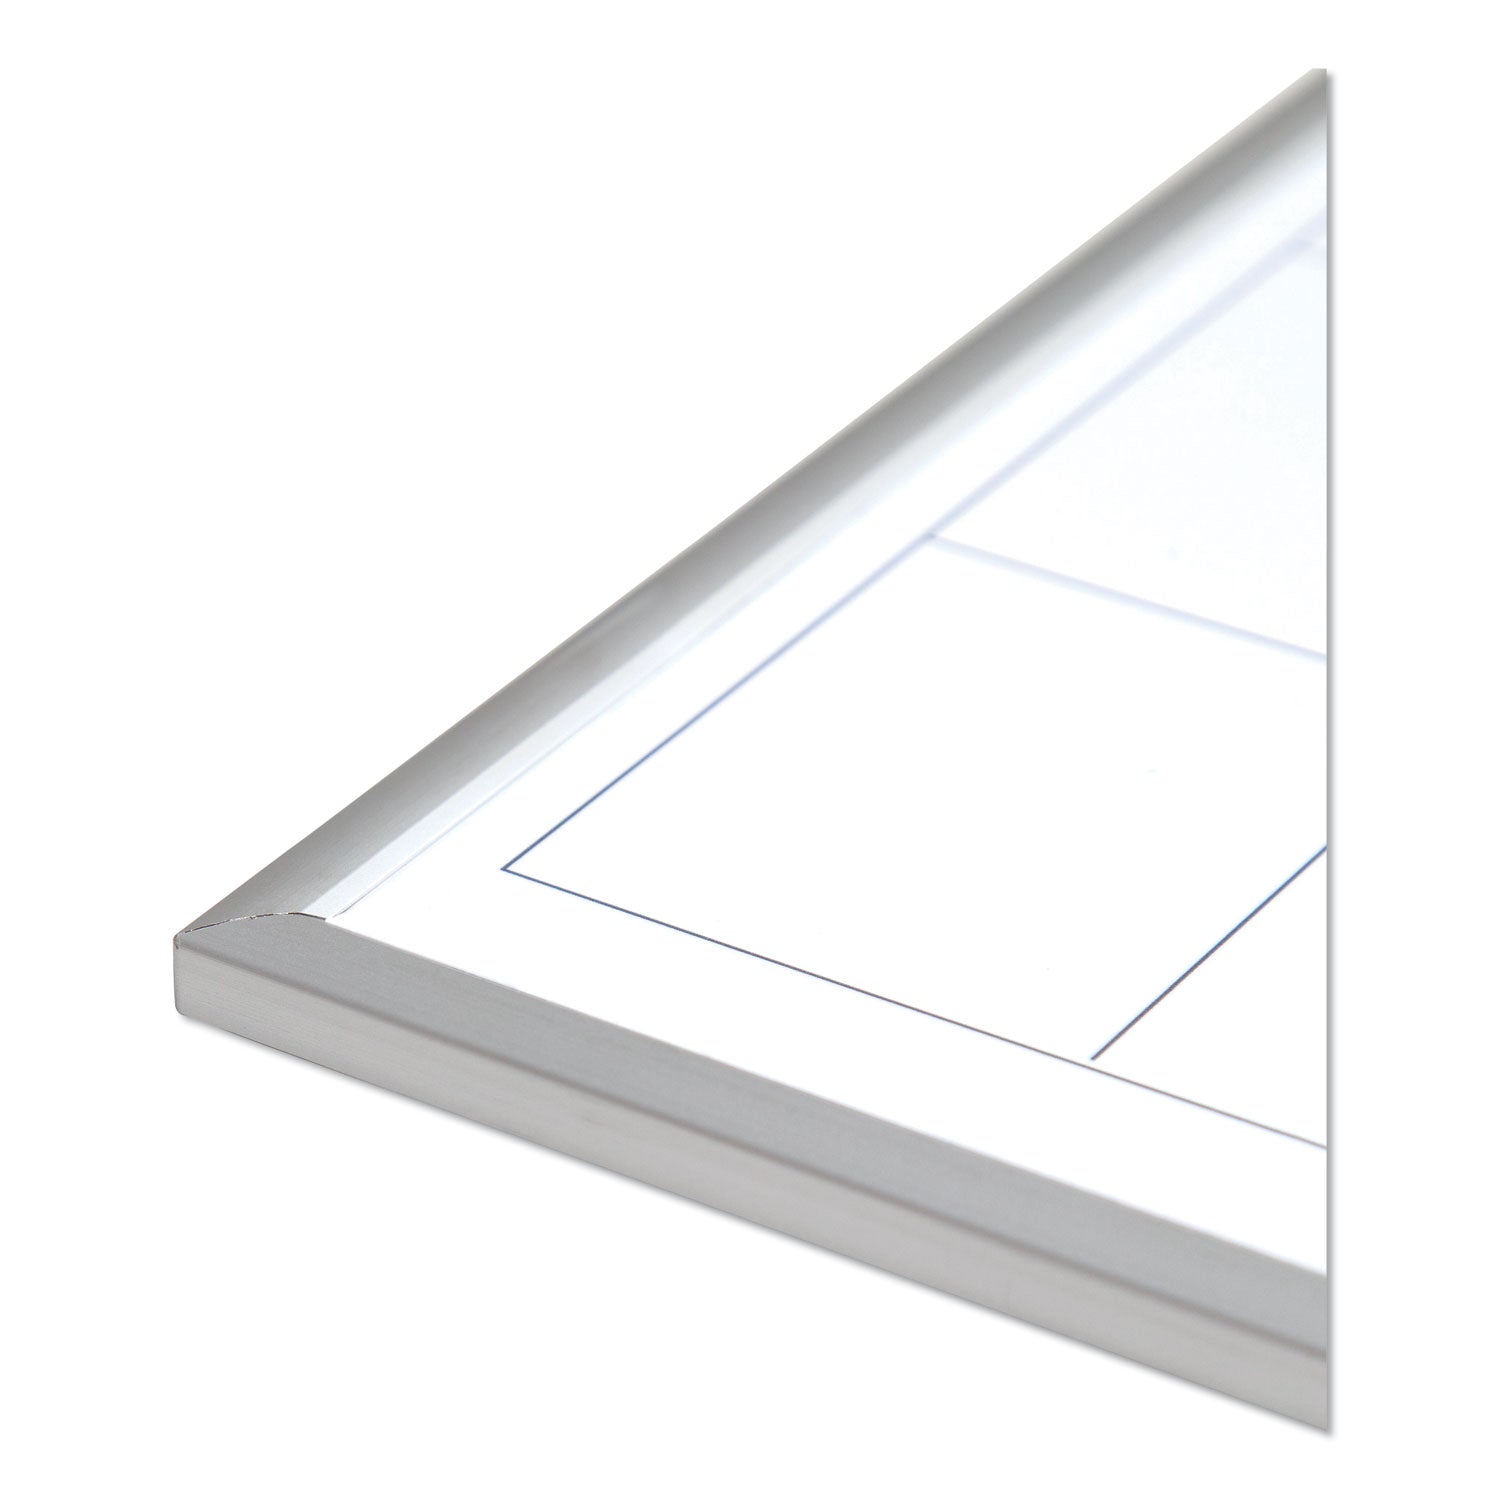 magnetic-dry-erase-board-undated-one-month-20-x-16-white-surface-silver-aluminum-frame_ubr361u0001 - 3